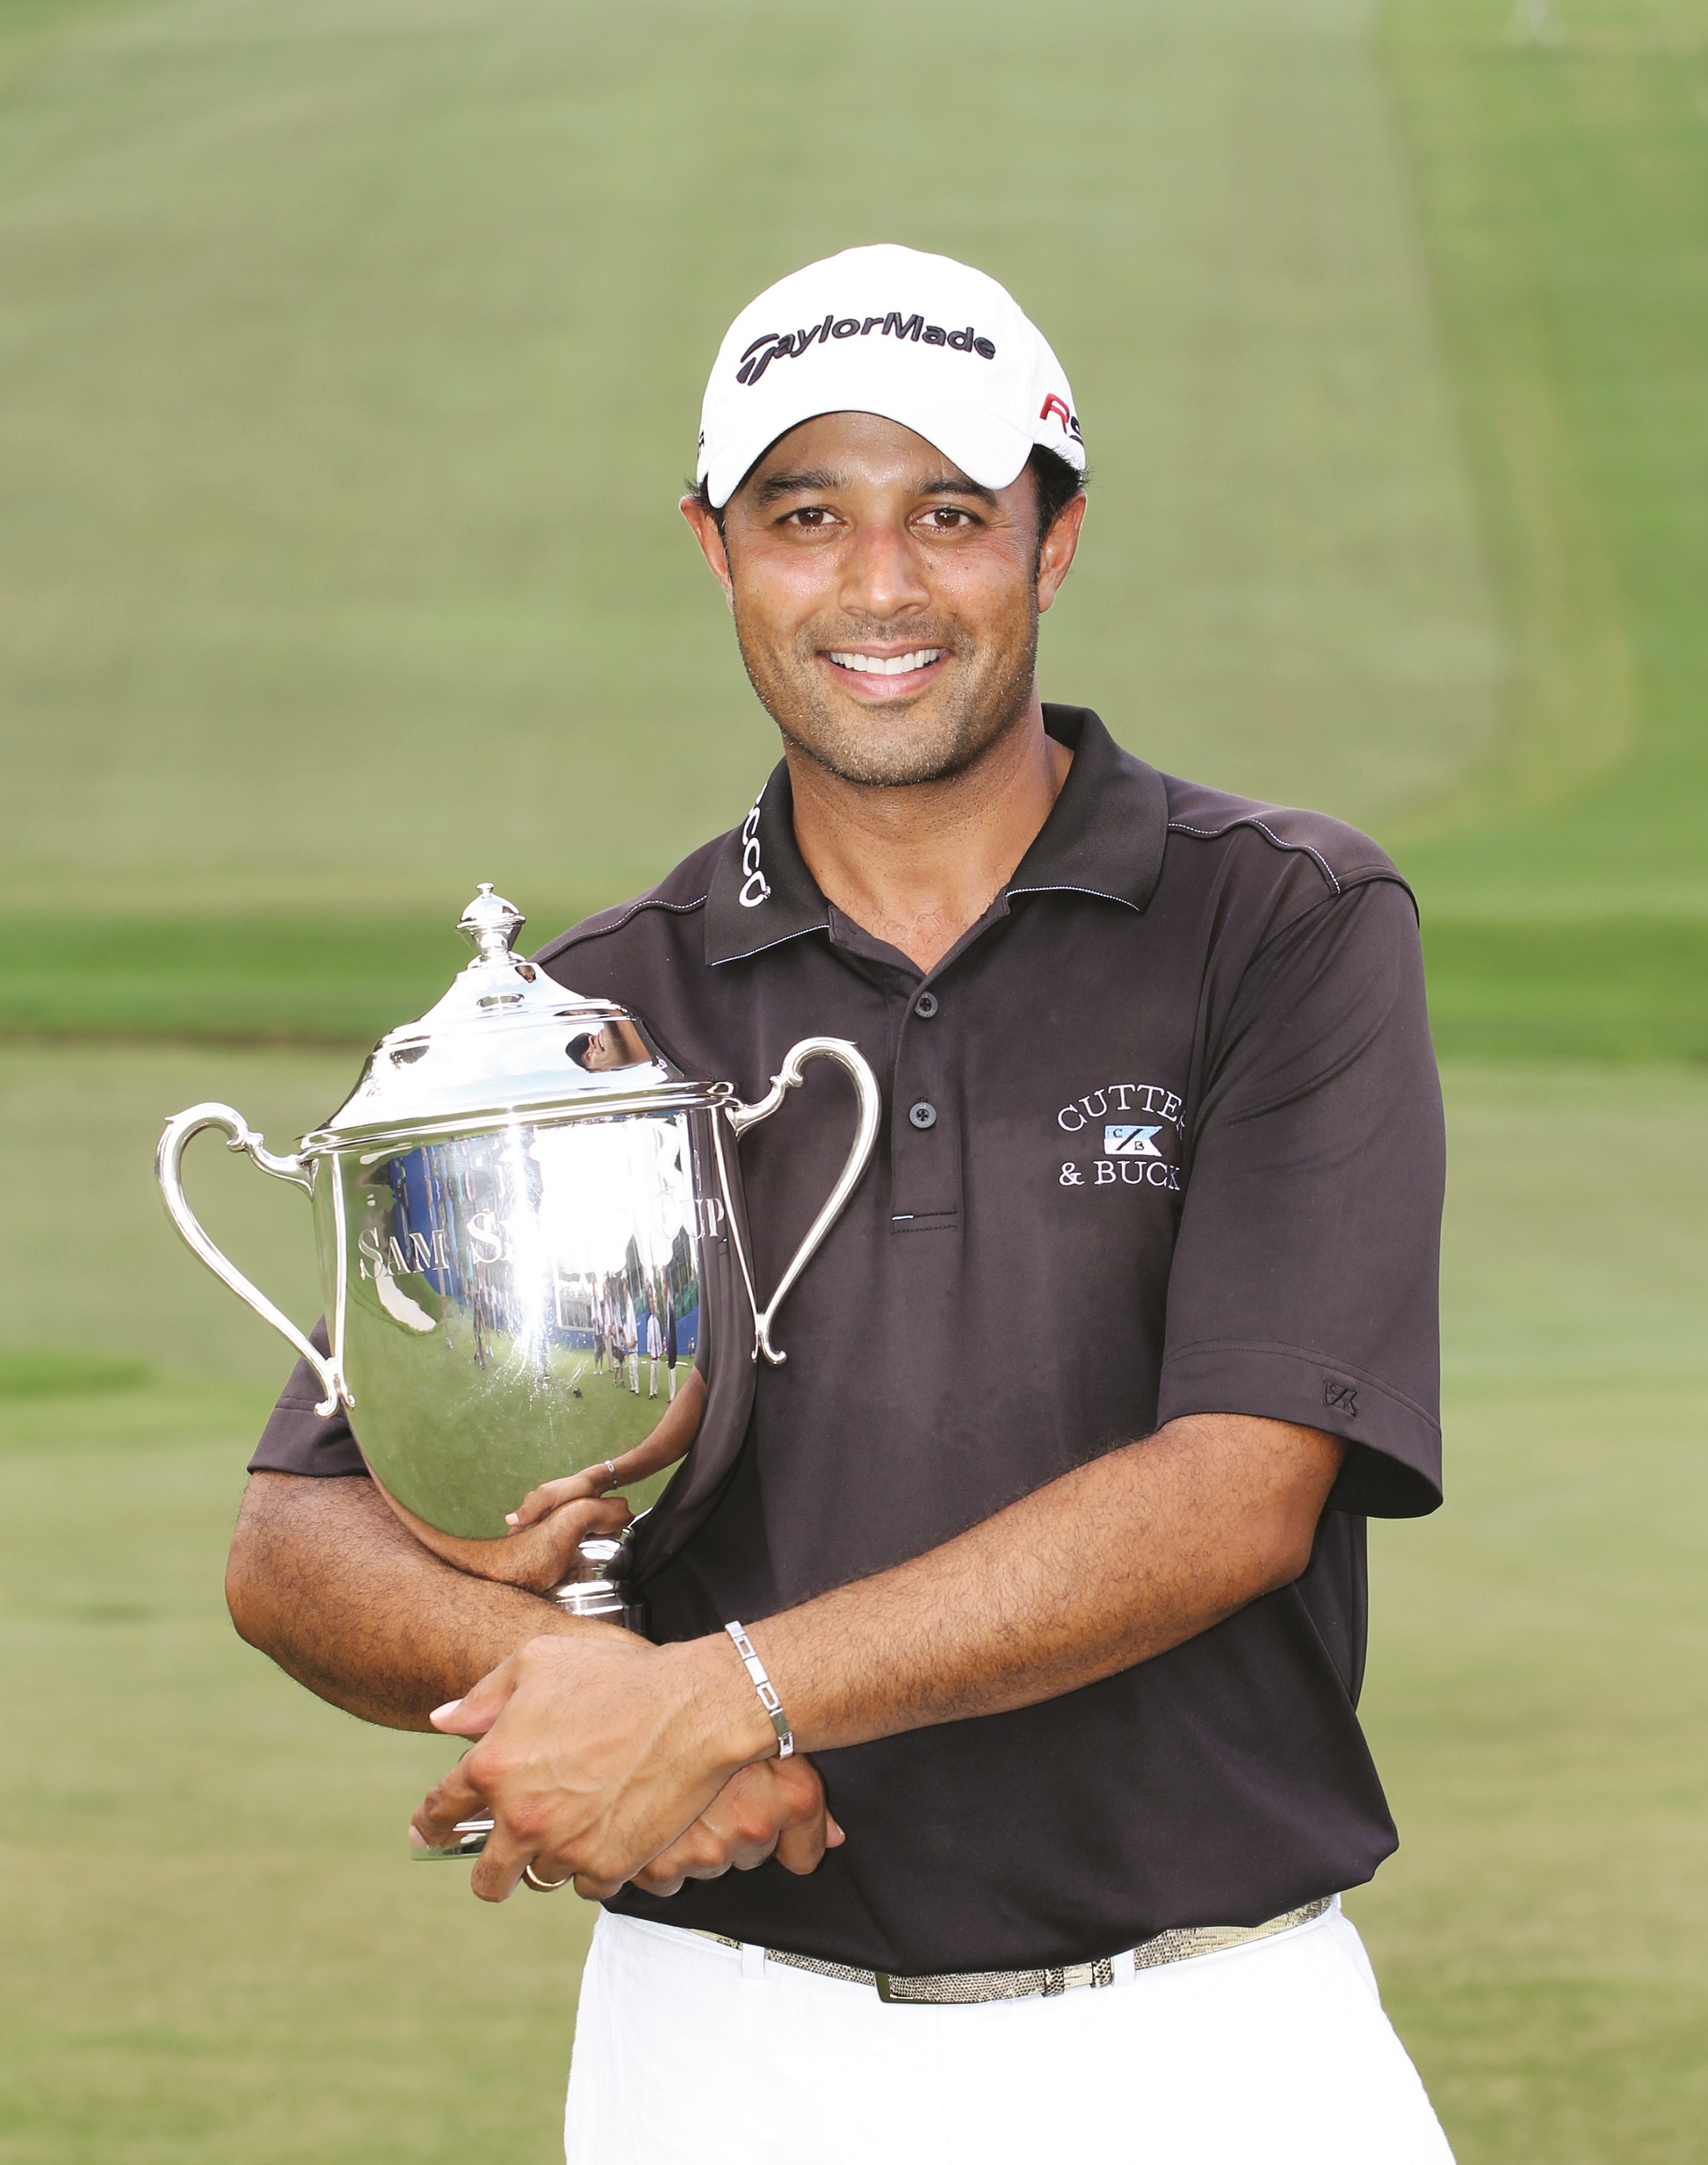 Arjun Atwal 2 during the Rocket Mortgage Classic in July. Mandatory credit Getty Images